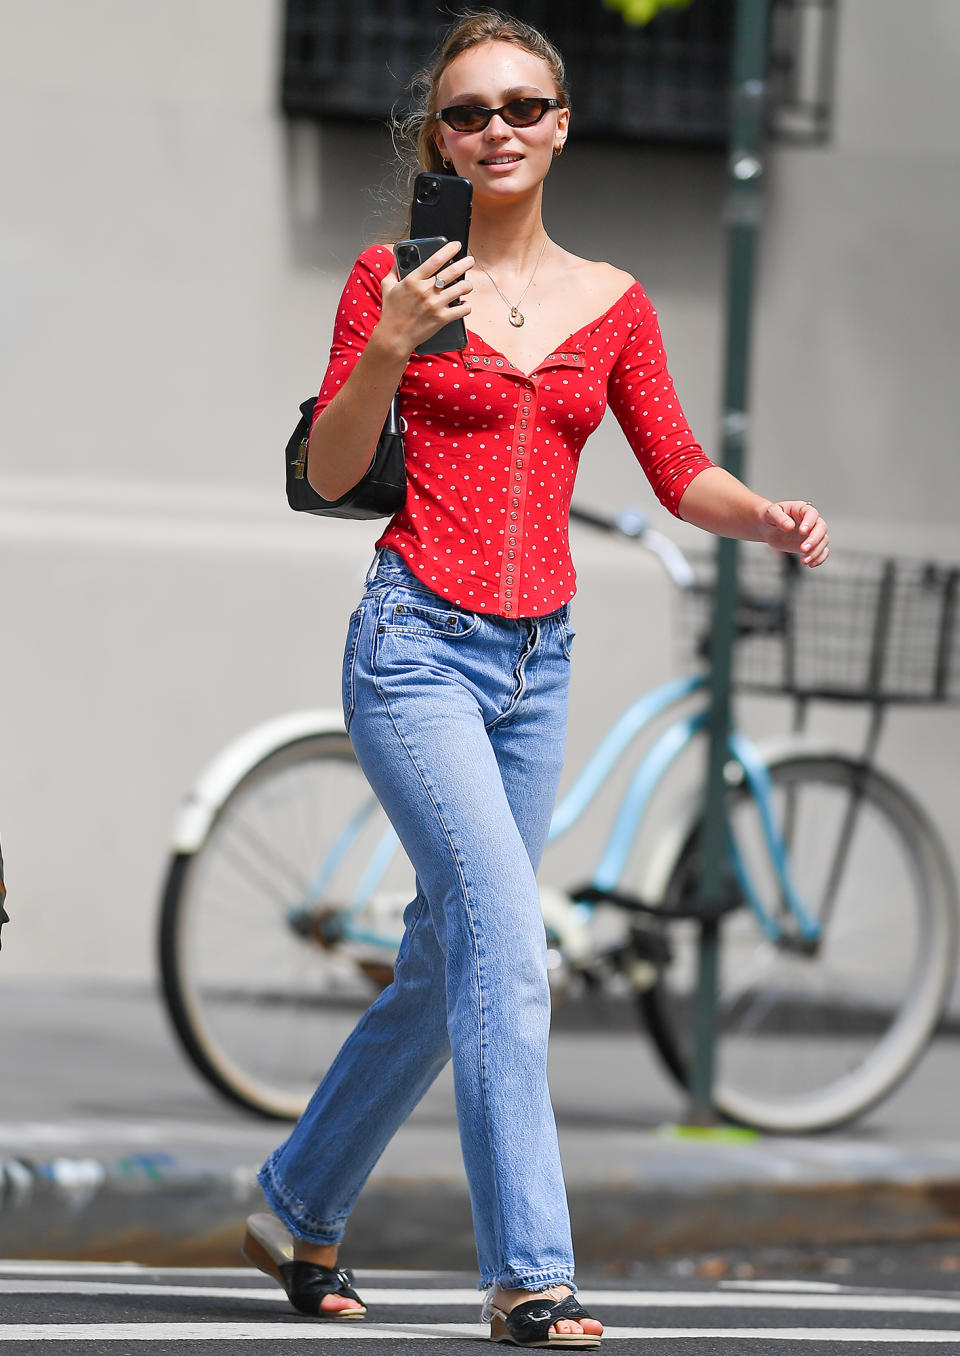 <p>Lily-Rose Depp chats with a friend on her way to grab coffee on Aug. 17 in N.Y.C.</p>